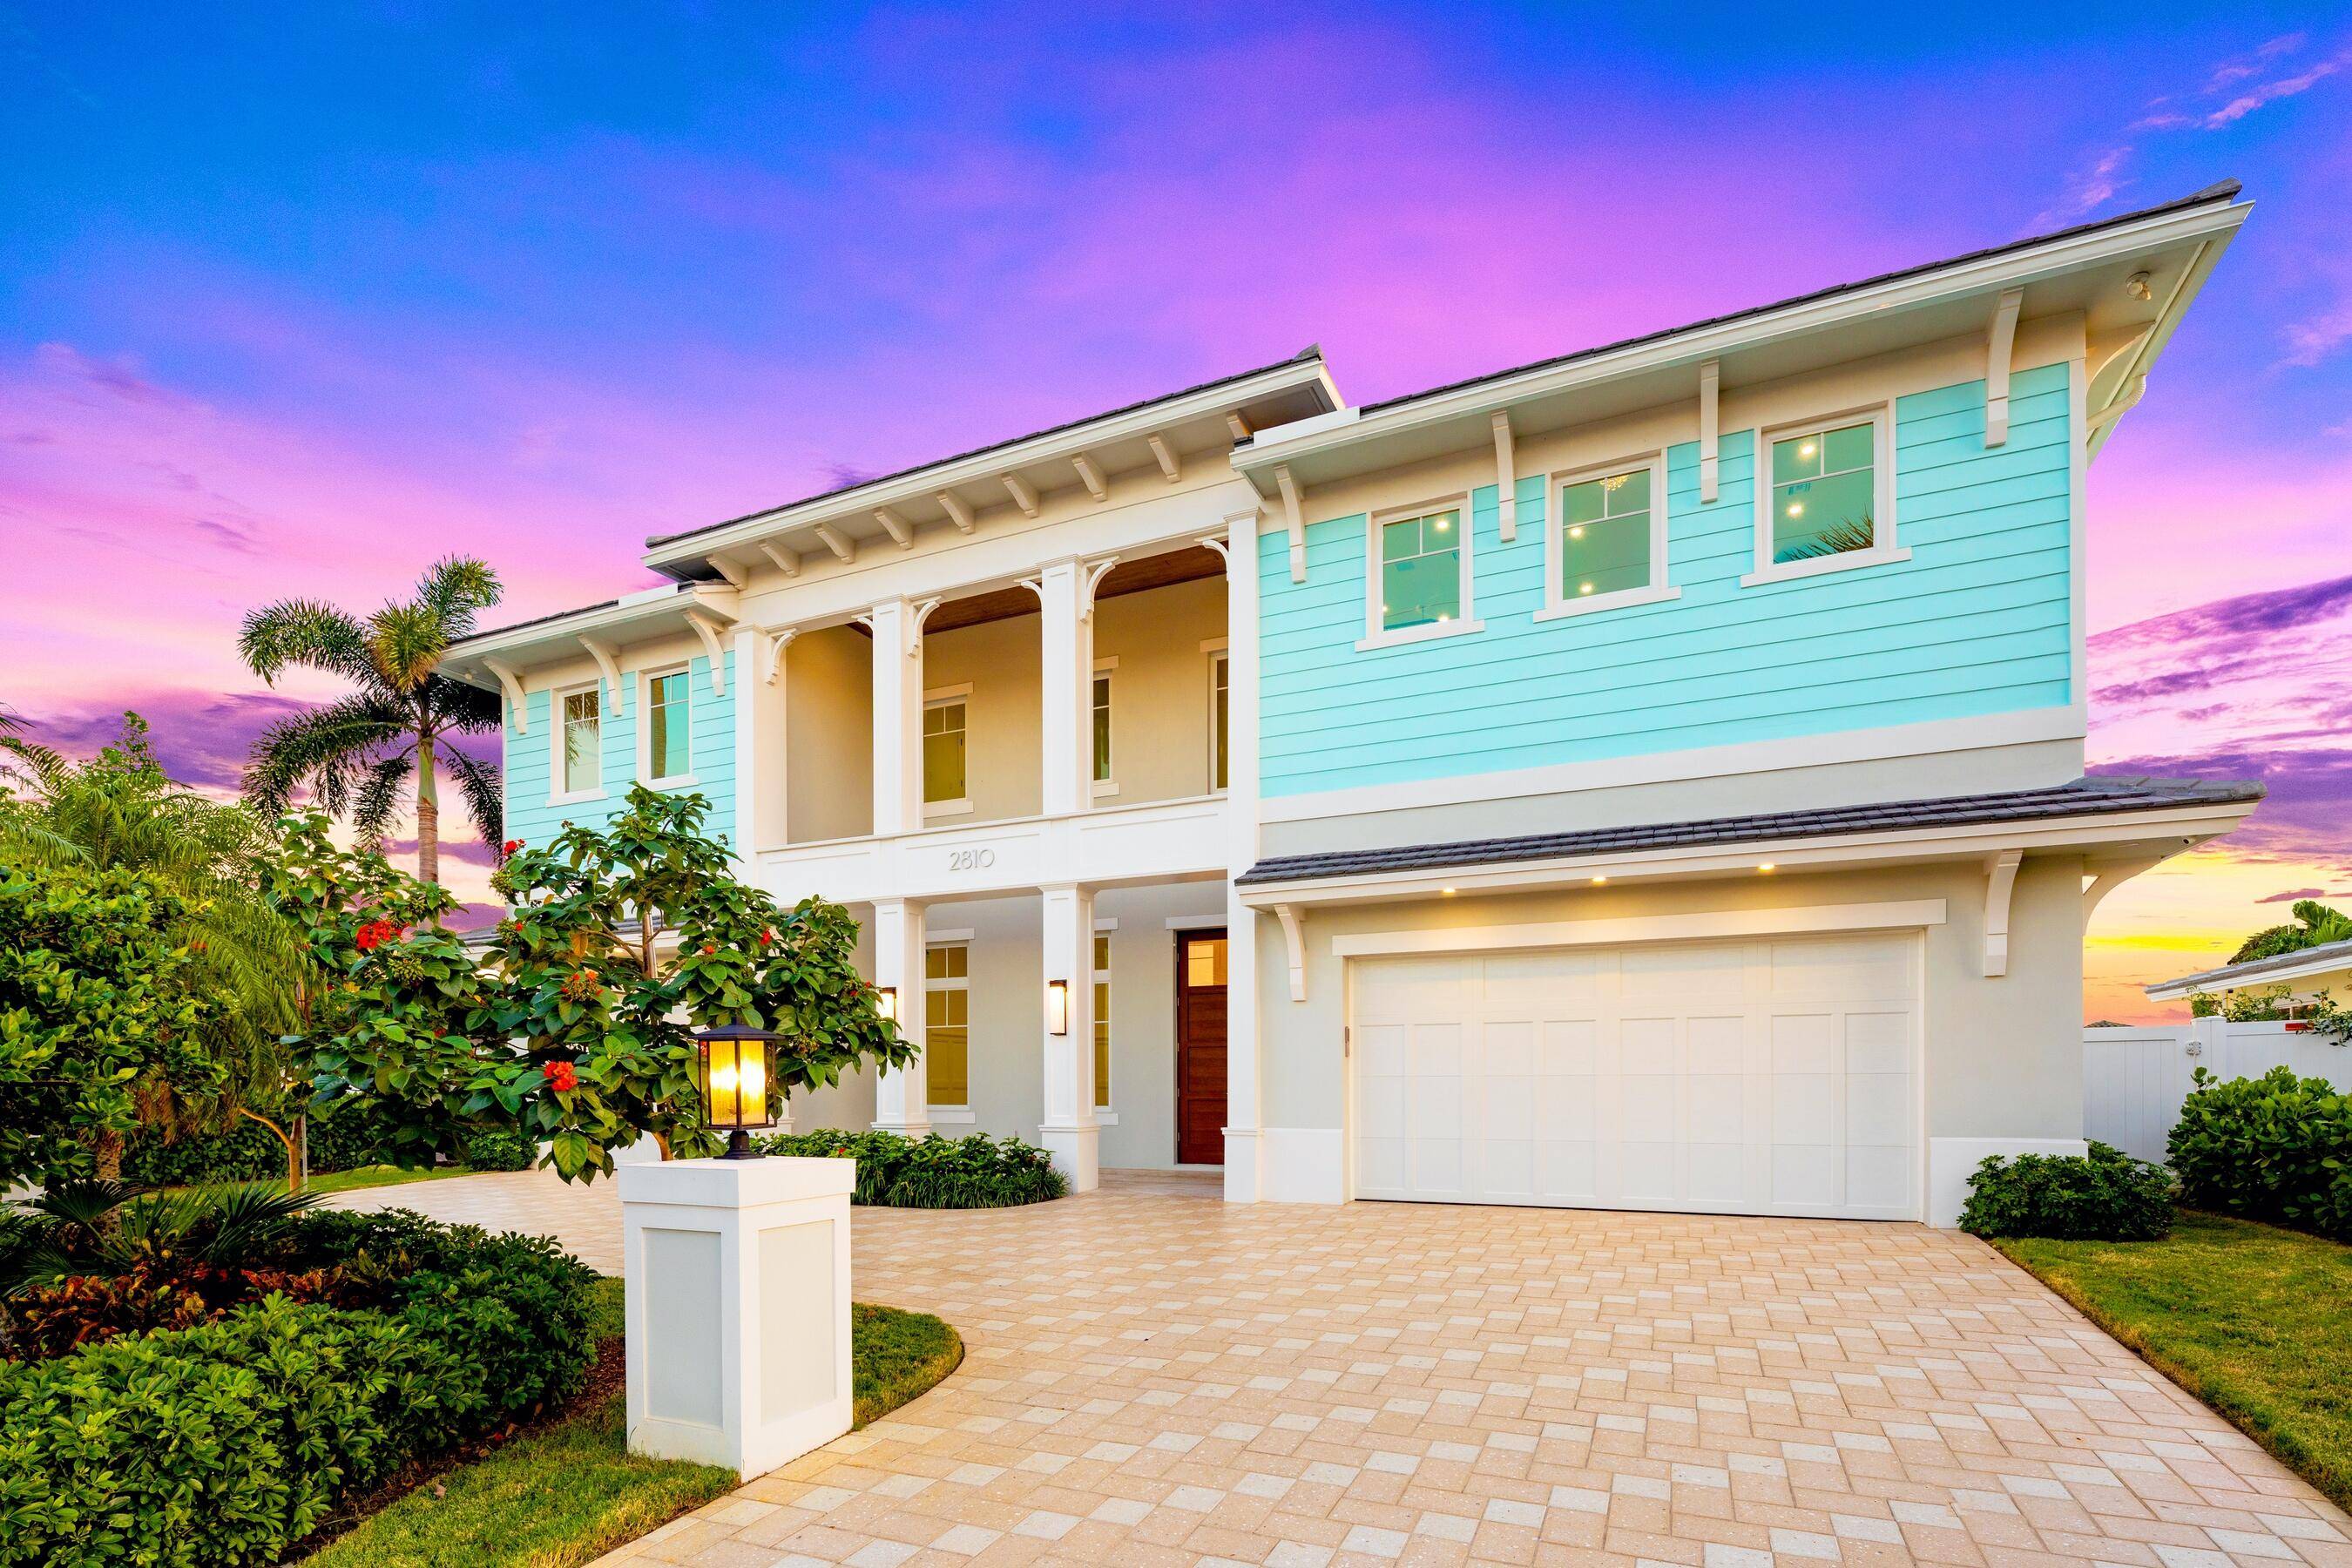 Stunning British West Indies inspired deepwater estate in the exclusive enclave of Pompano Beach, Florida.